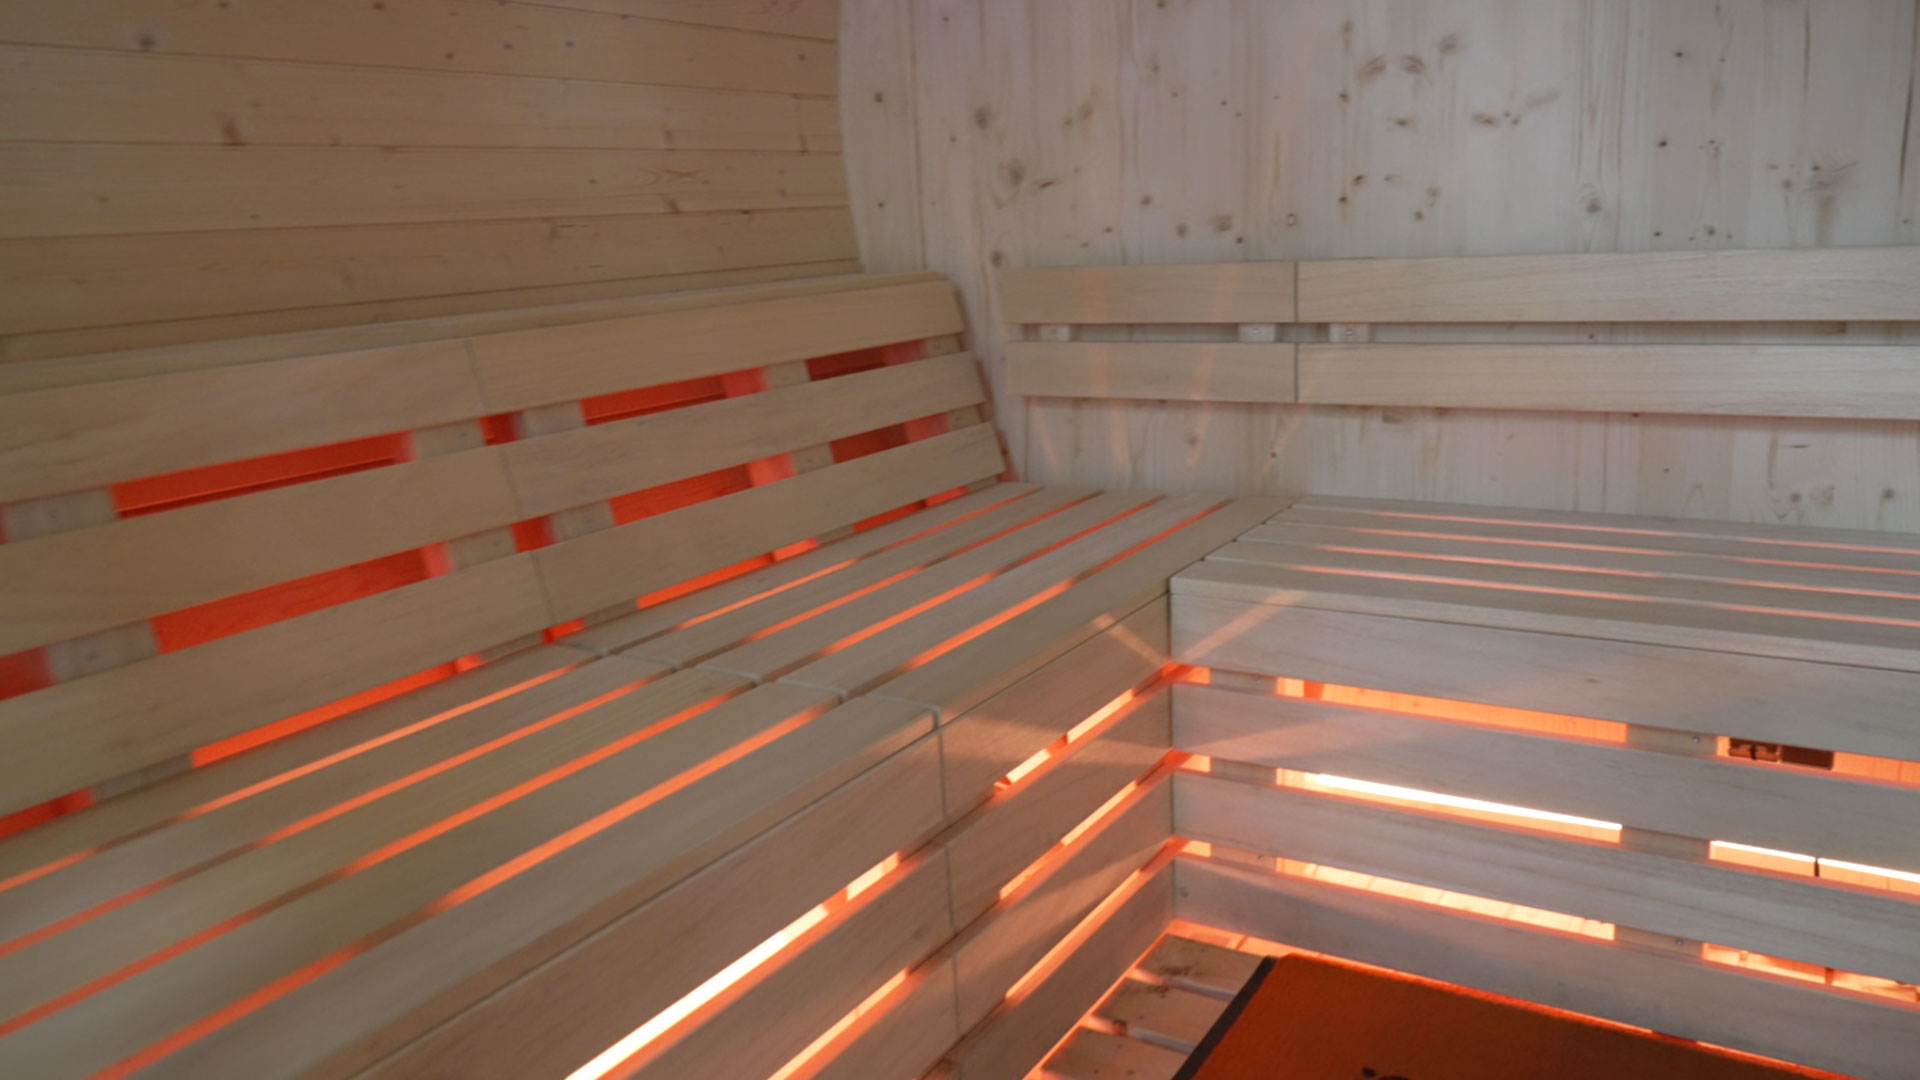 Large sauna for several people